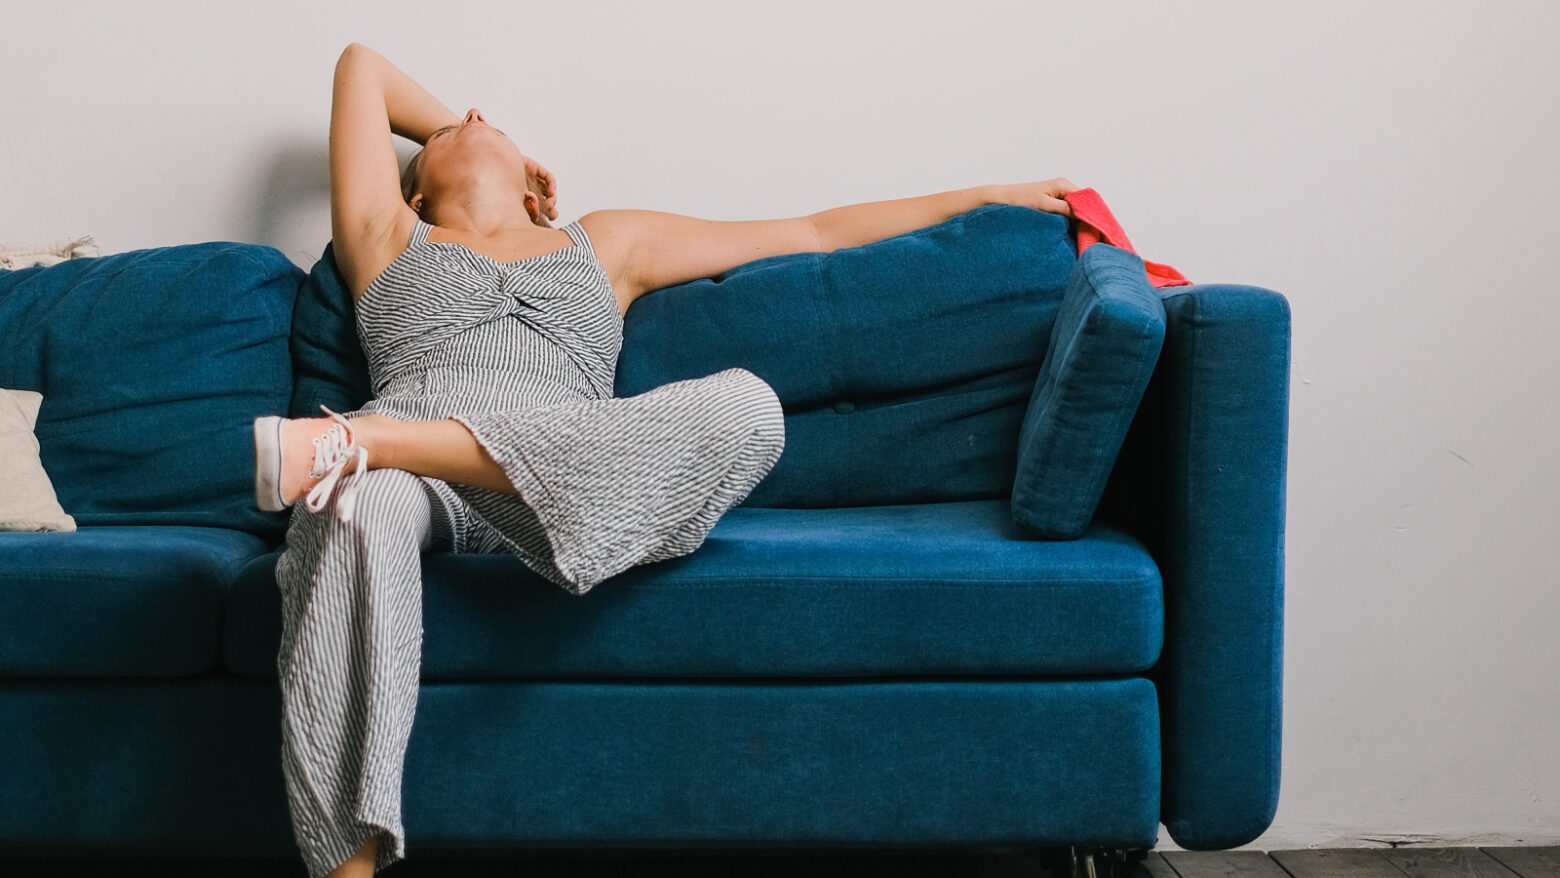 Exhausted woman lying back on a couch